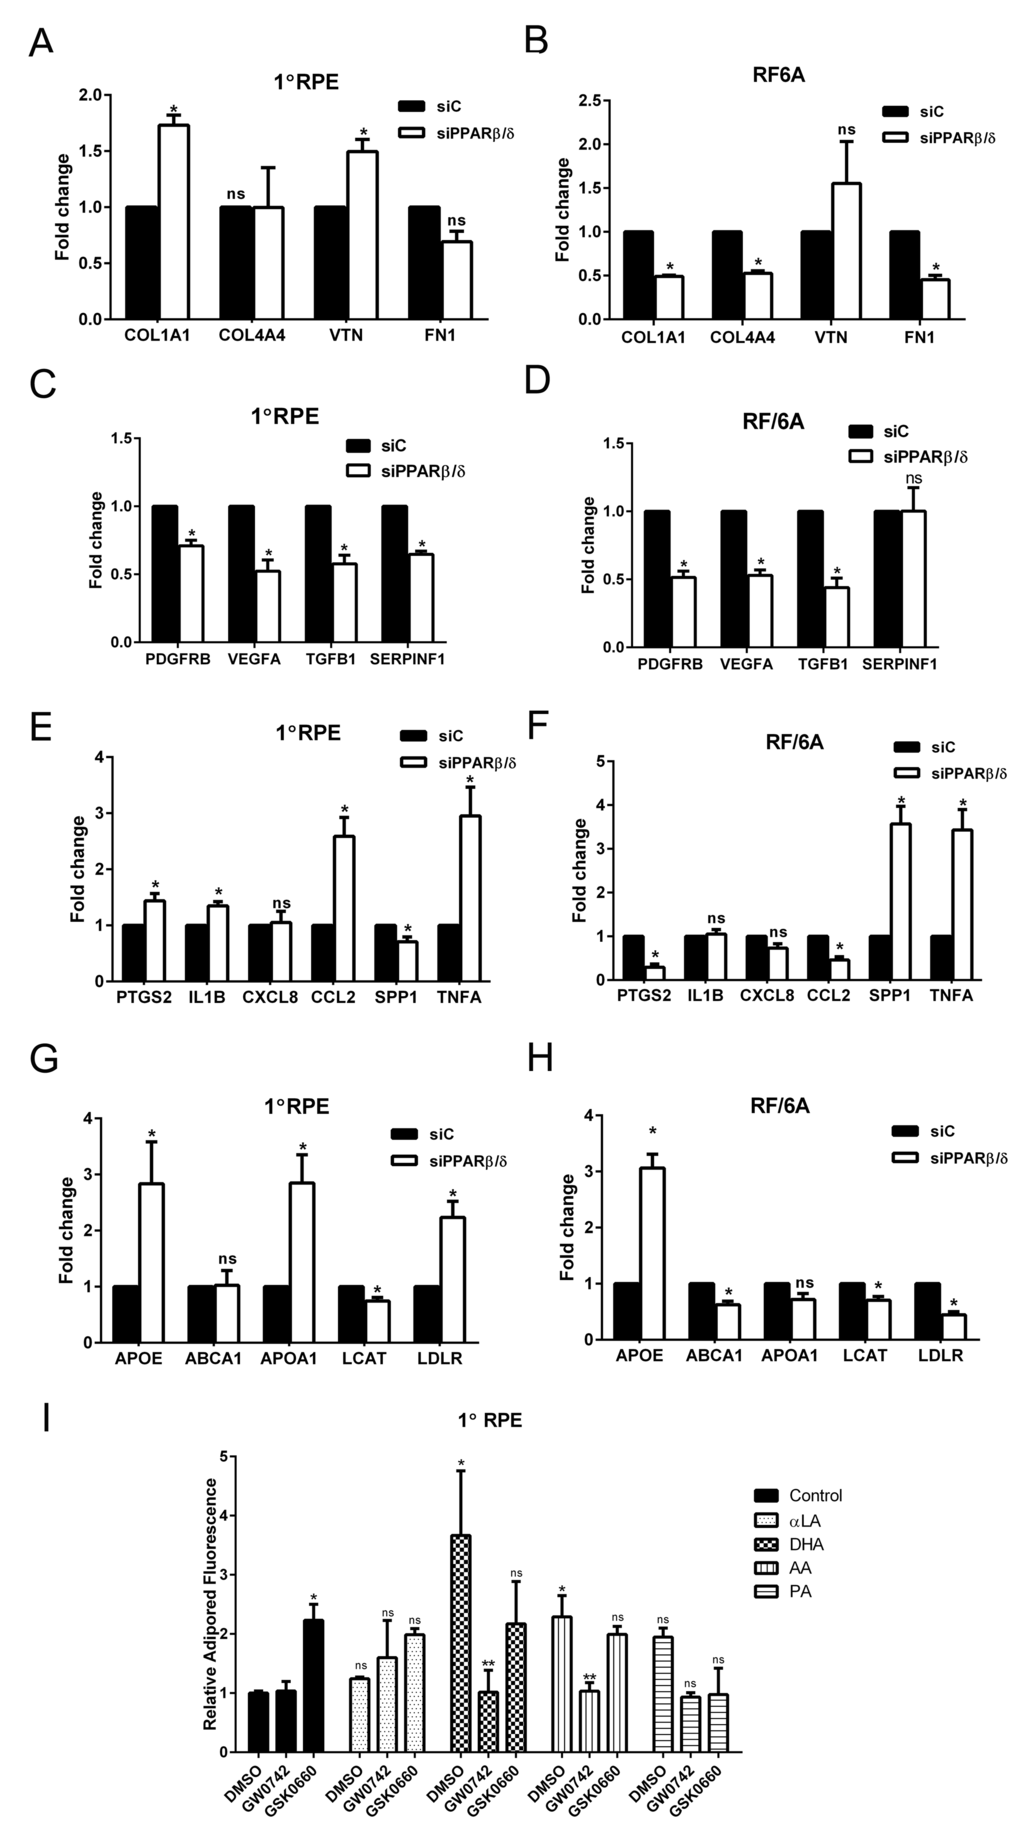 PPARβ/δ regulates both dry- and wet-AMD related pathogenic pathways. Effect of siRNA mediated knockdown of PPARβ/δ on mRNA expression of extracellular matrix genes COL1A1, COL4A4, FN1 and VTN; angiogenesis and fibrosis genes, VEGFA, PDGFB, TGFB1 and SERPINF1; inflammation-related genes, PTGS2, IL1B, CXCL8, CCL2, SPP1, and TNFA; and lipid processing genes APOE, ABCA1, APOA1, LCAT and LDLR in 1°RPE cells (A, C, E, and G) and RF/6A (B, D, F and H) cells. (mean and S.E.M.; n = 3; *p  0.05, ns: not significant, two way ANOVA, Sidak’s multiple comparisons test); siC, control siRNA; siPPARβ/δ, PPARβ/δ siRNA. Quantification of intracellular lipid accumulation after lipid loading followed by incubation with PPARβ/δ agonist, GW0742 or antagonist, GSK0660 in (I) 1°RPE. (*, p